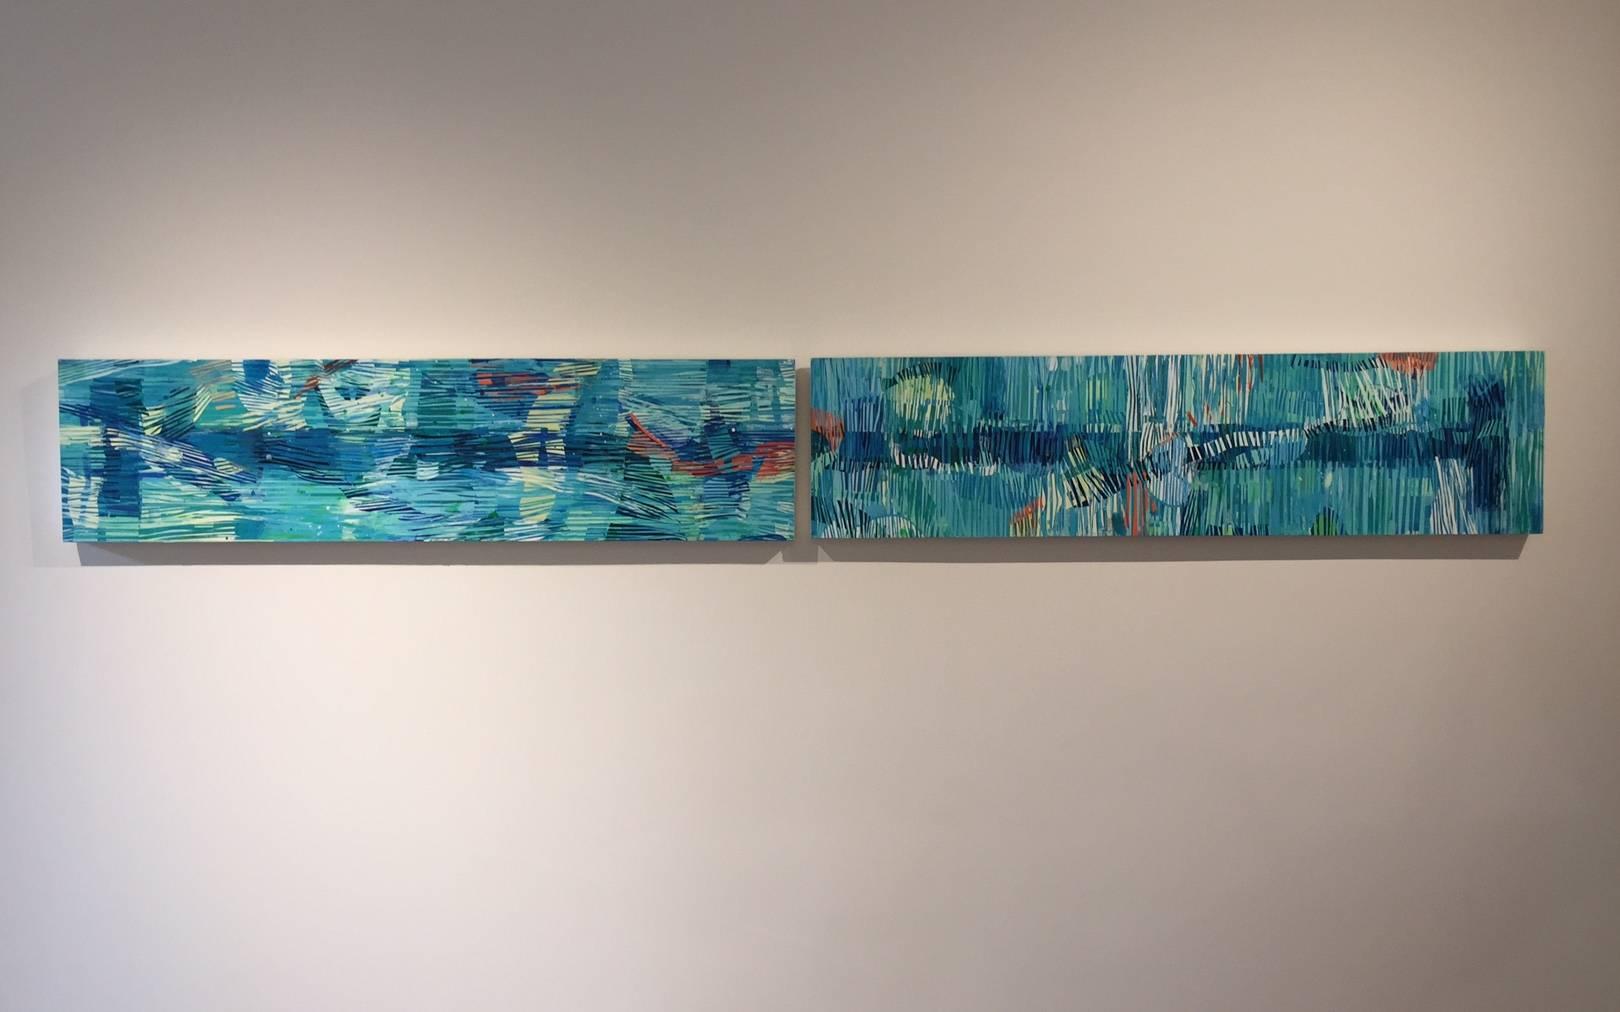 Sunset Lanes (Swimming Pool Lanes) diptych - Painting by Kim Frohsin